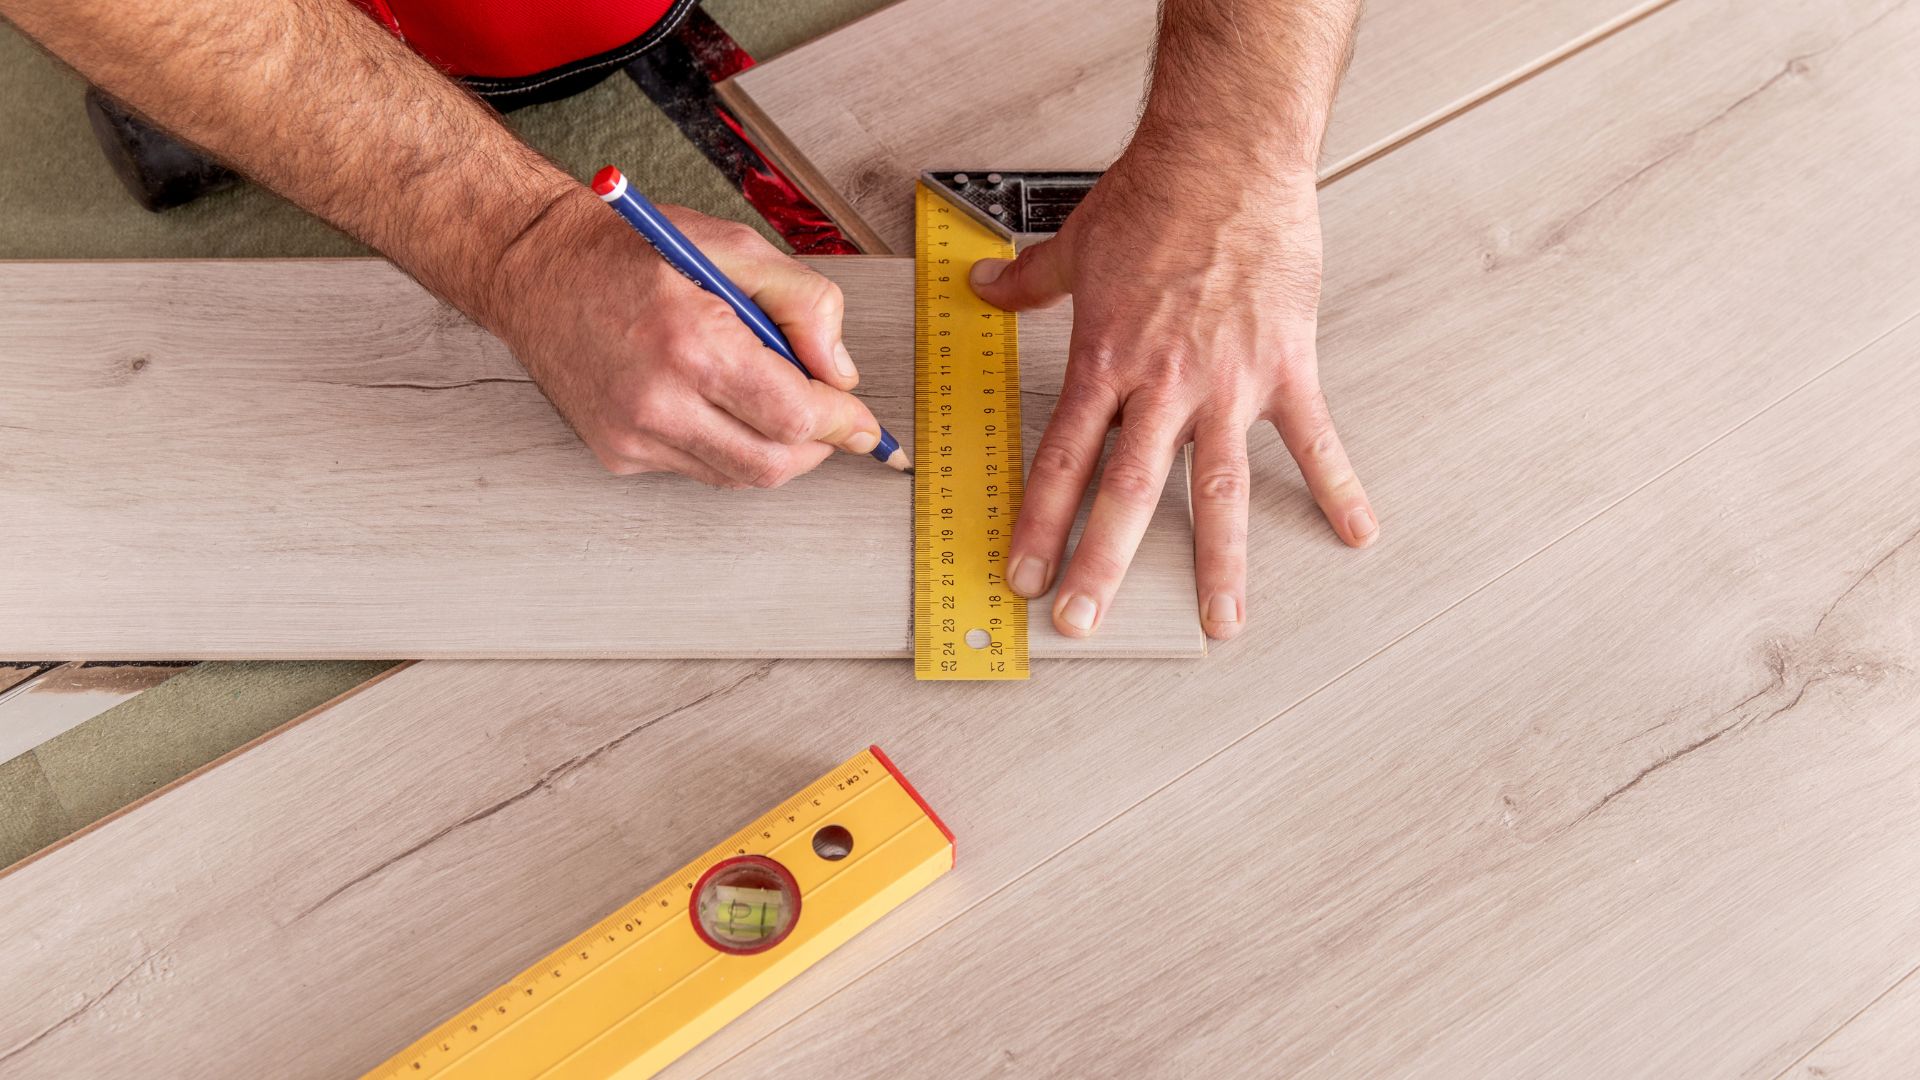 Will there be any cutting waste laminate flooring